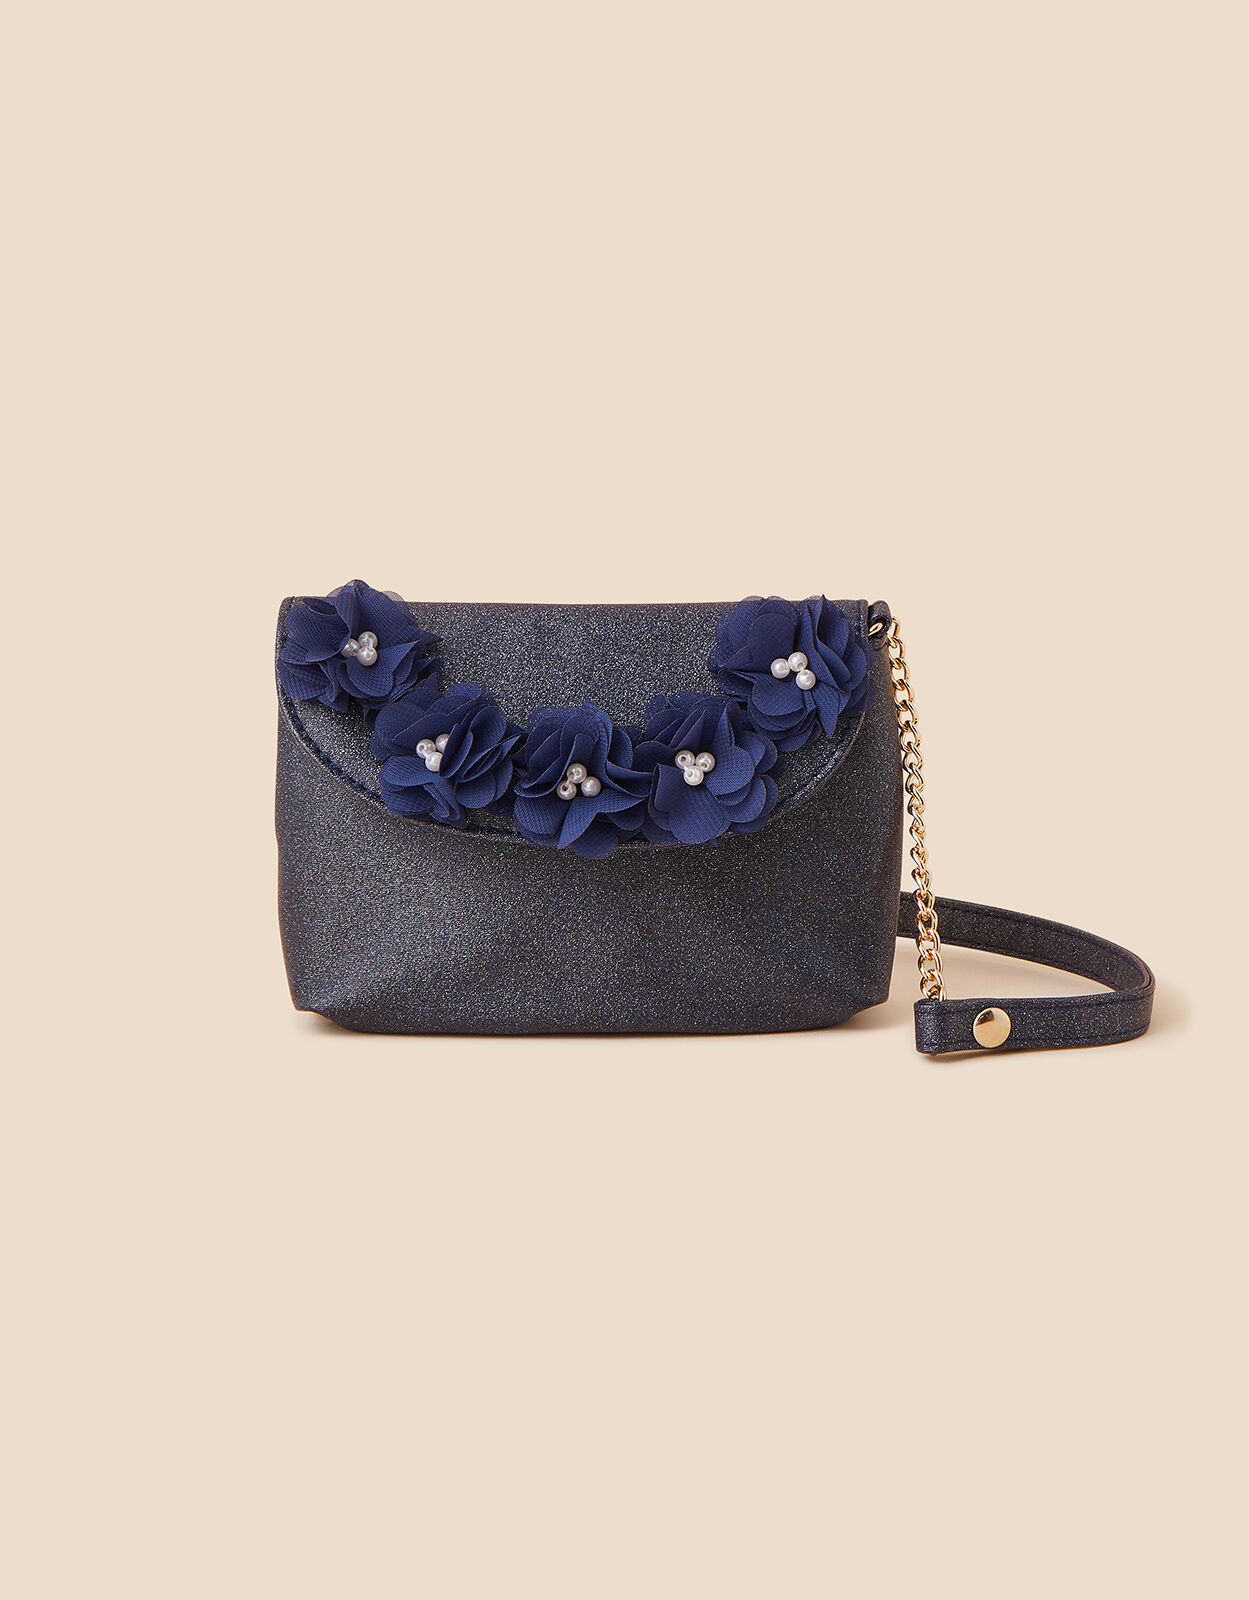 Cute bags from Accessorize - Griffblog UK fashion & lifestyle